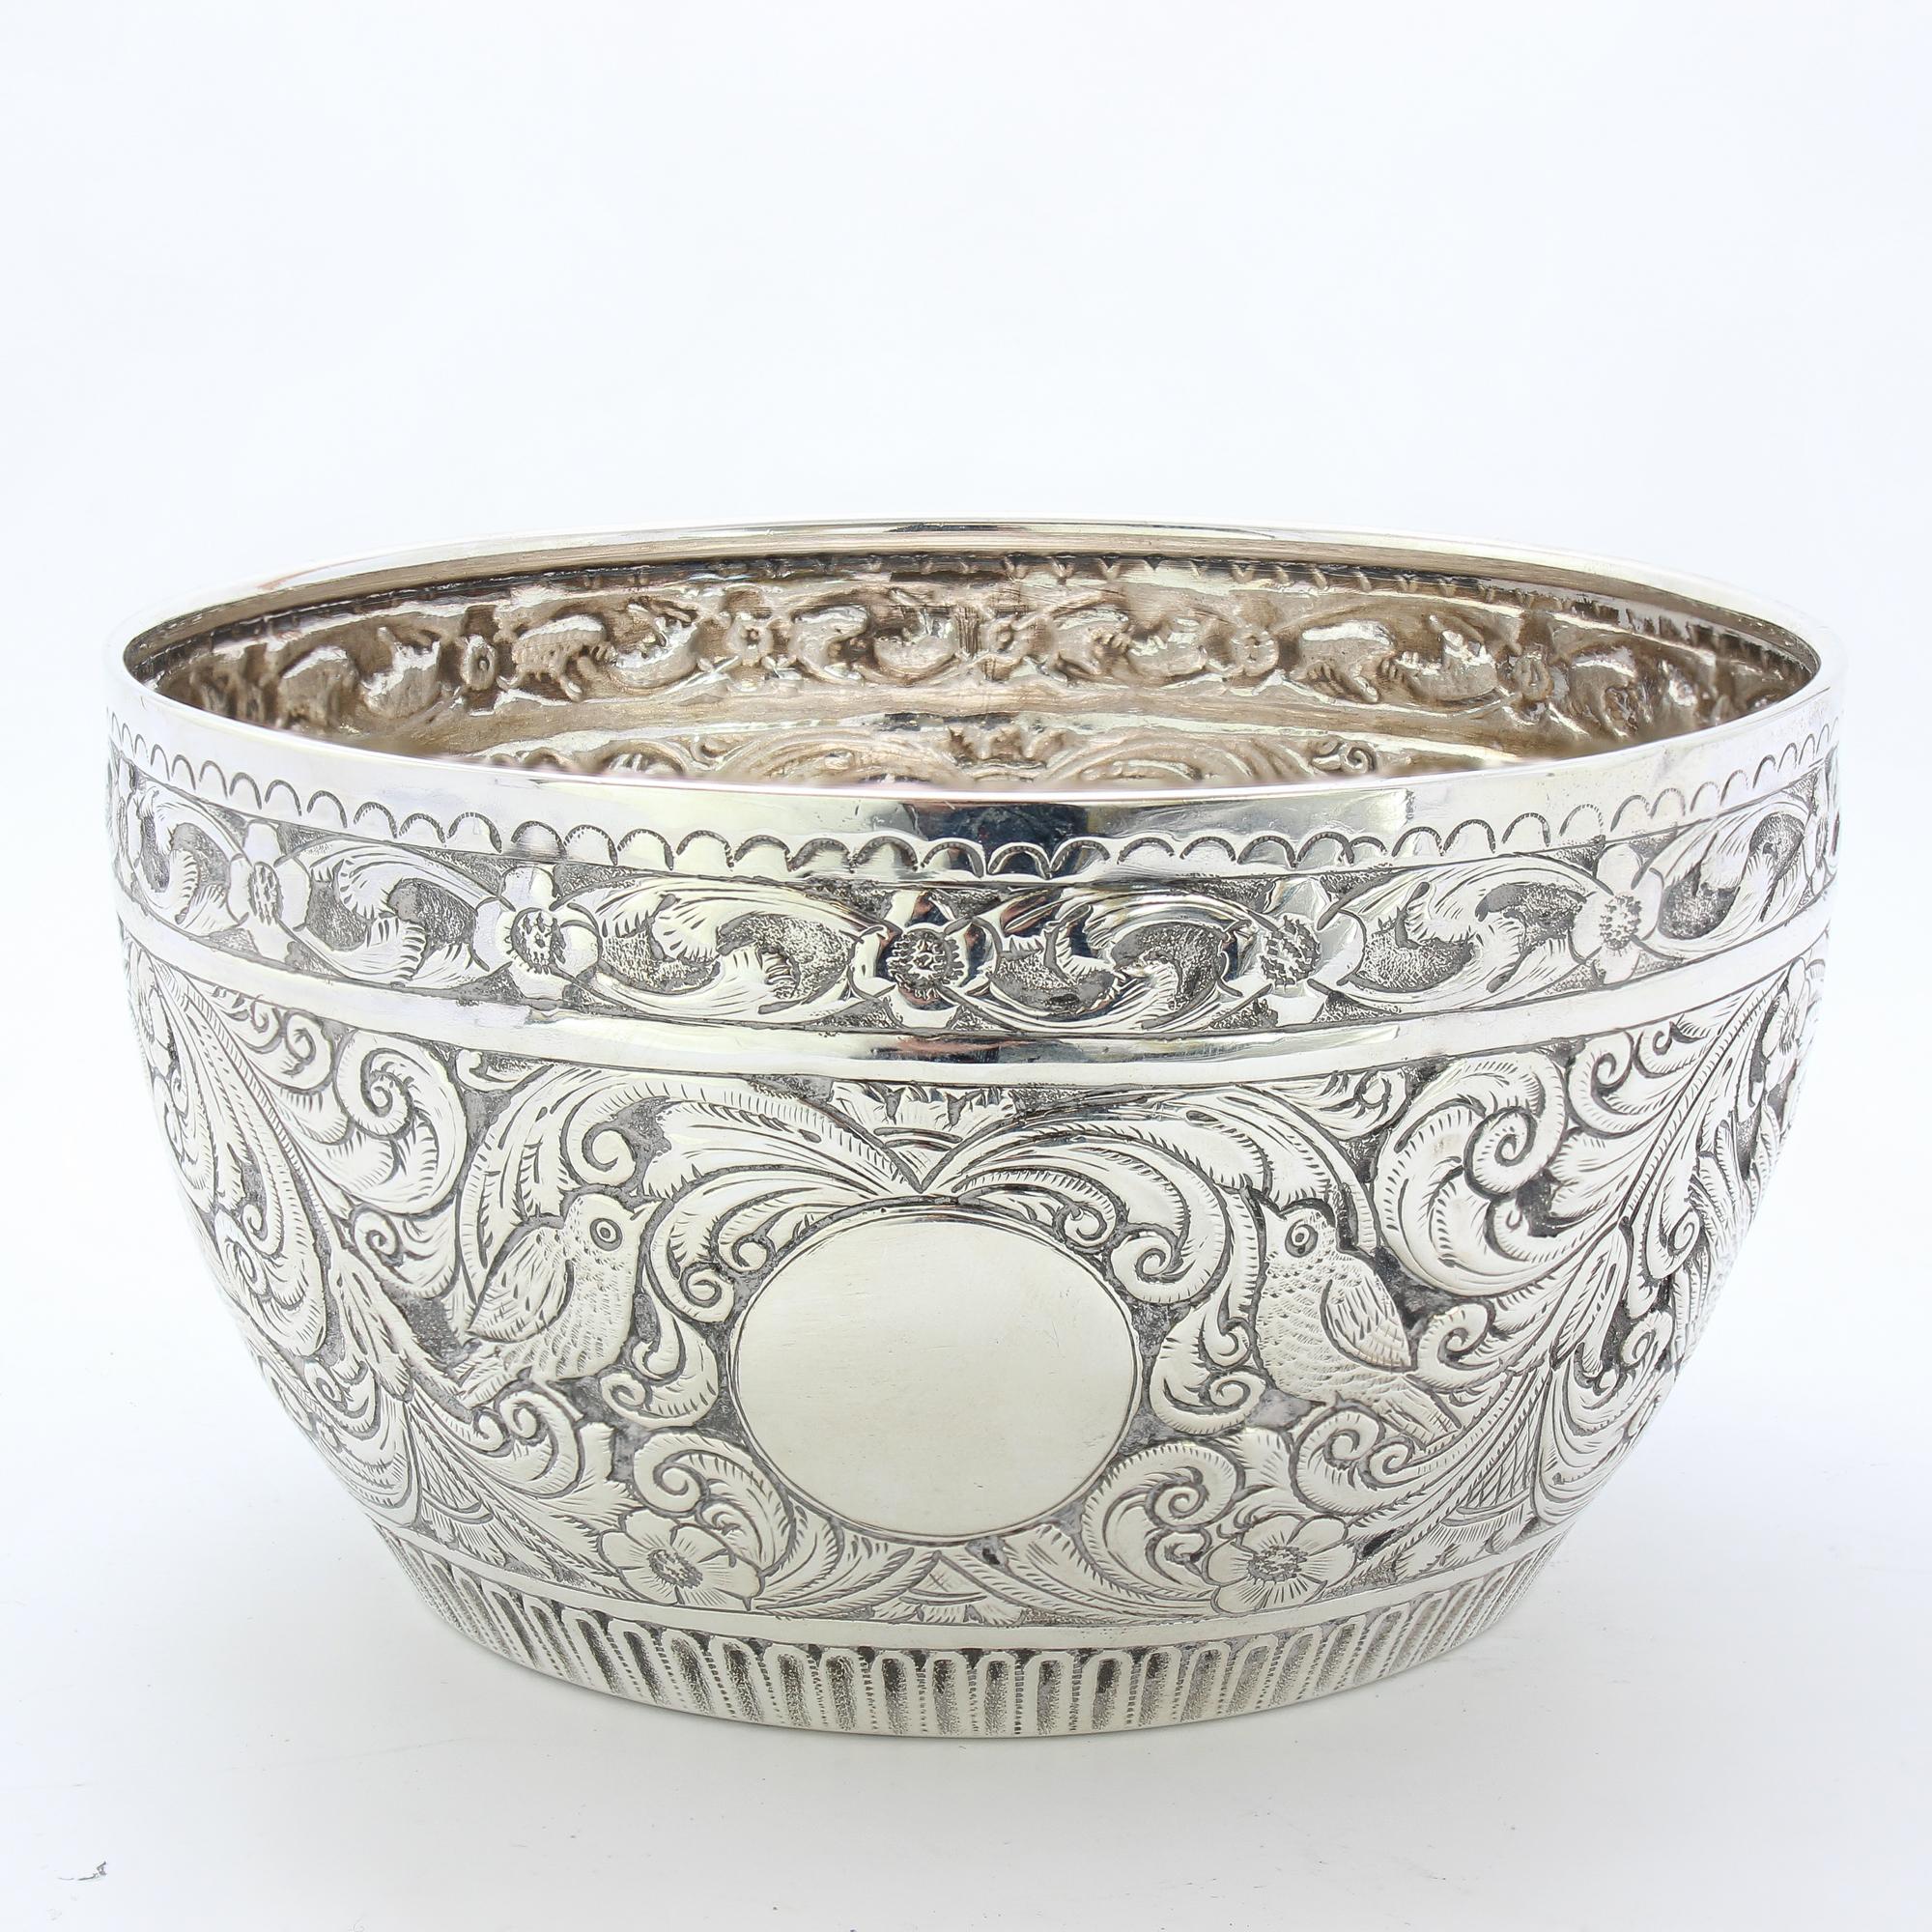 The traditional shape of this silver bowl is well preserved over time. The ornate birds on the front and rear are beautifully carved into detail, ending in intricate engraved wings. As old as it looks, this gorgeous dish was made in London 1888 by a